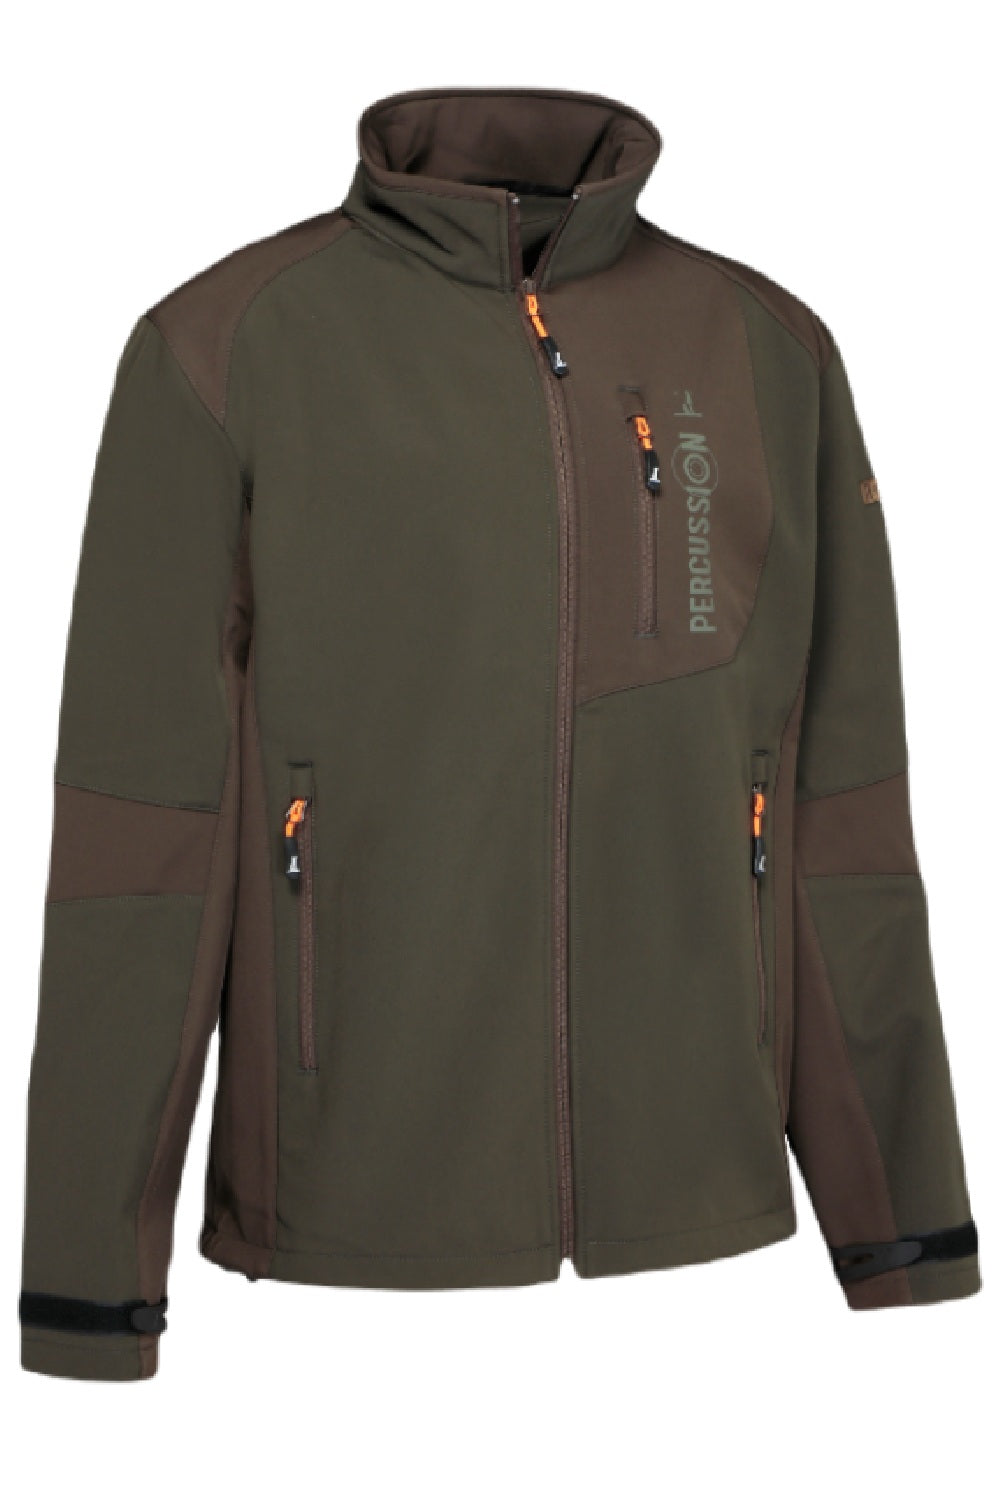 Percussion Softshell Waterproof Jacket in Green/Brown